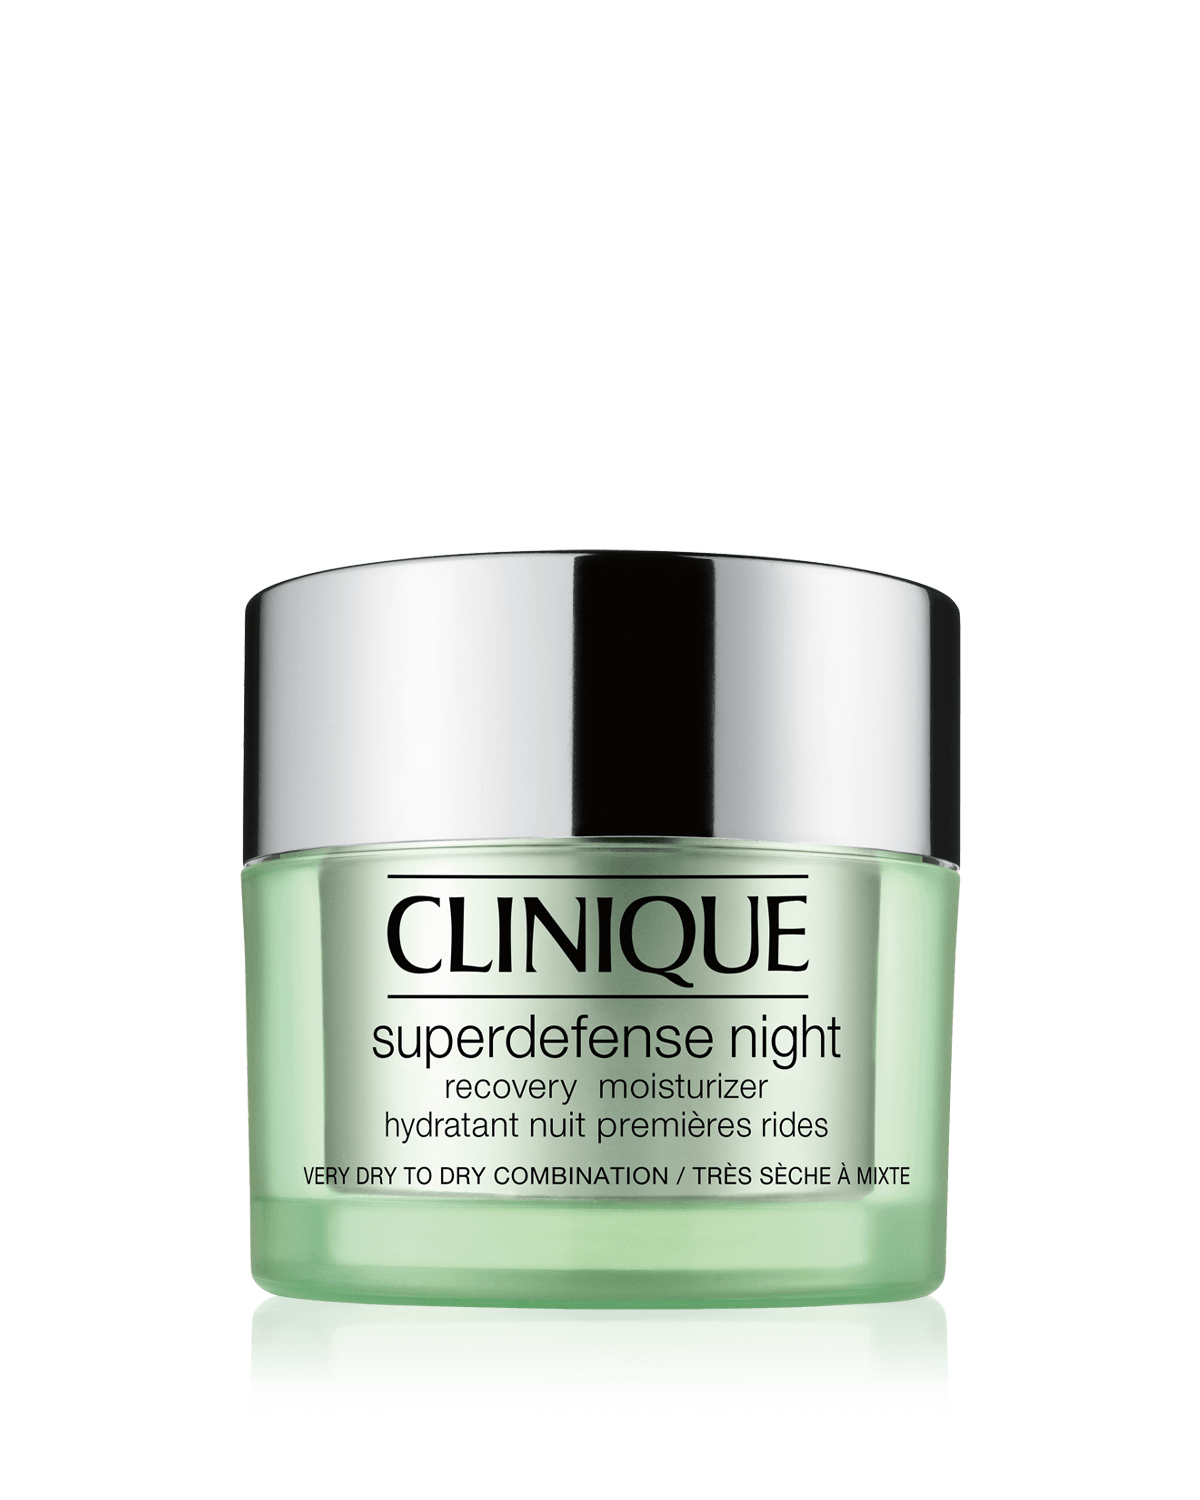 Clinique Superdefense Night Recovery